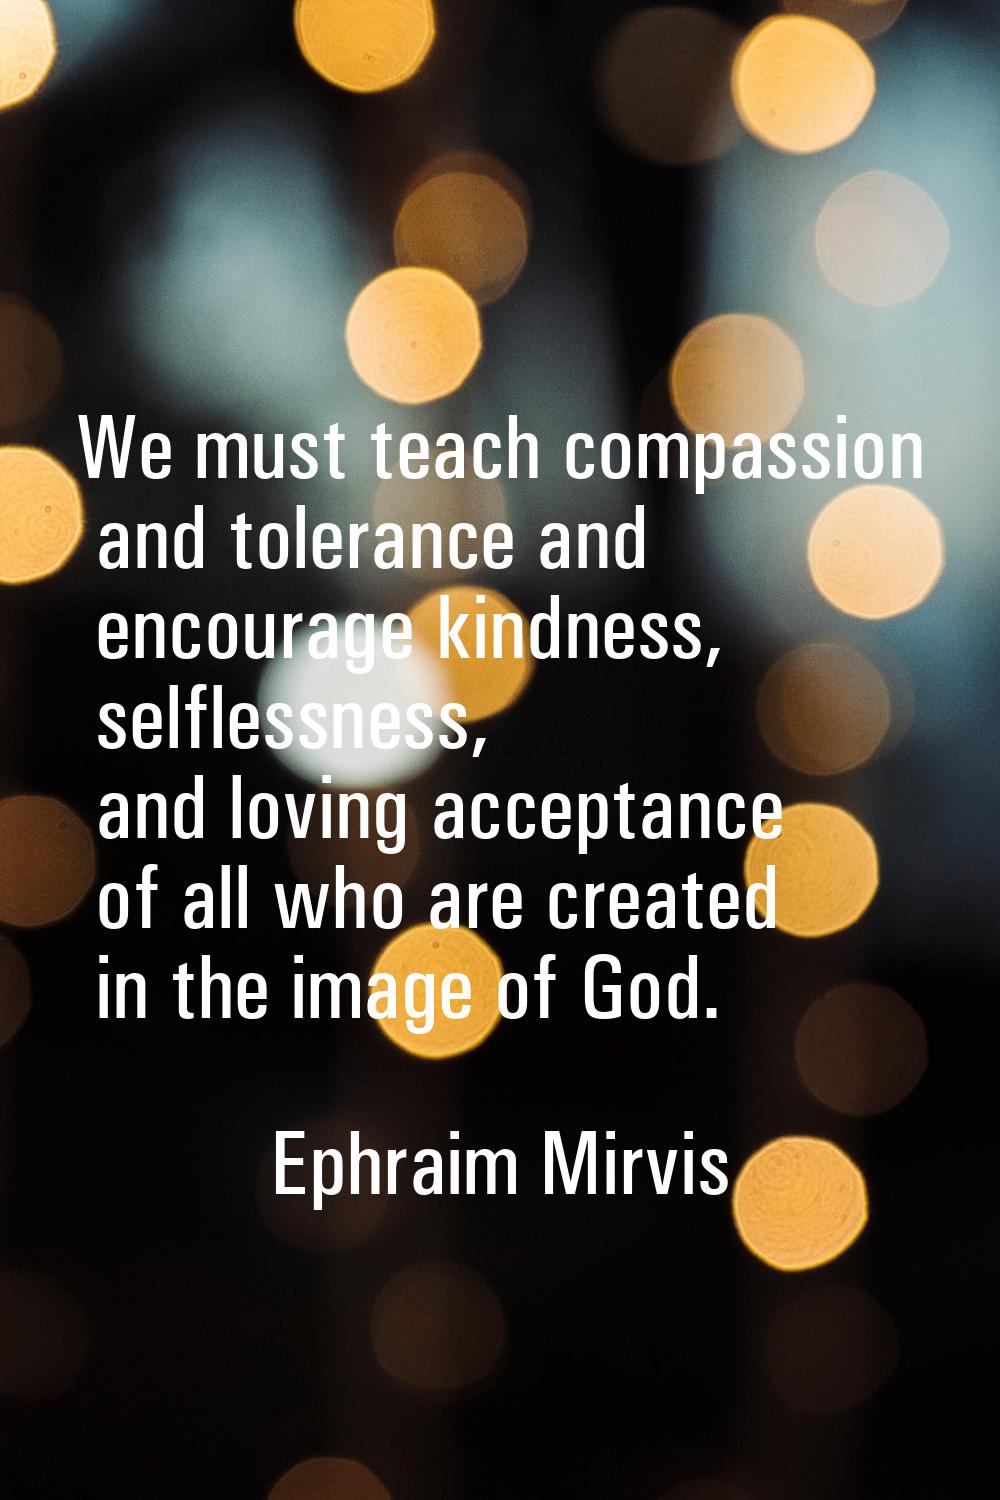 We must teach compassion and tolerance and encourage kindness, selflessness, and loving acceptance 